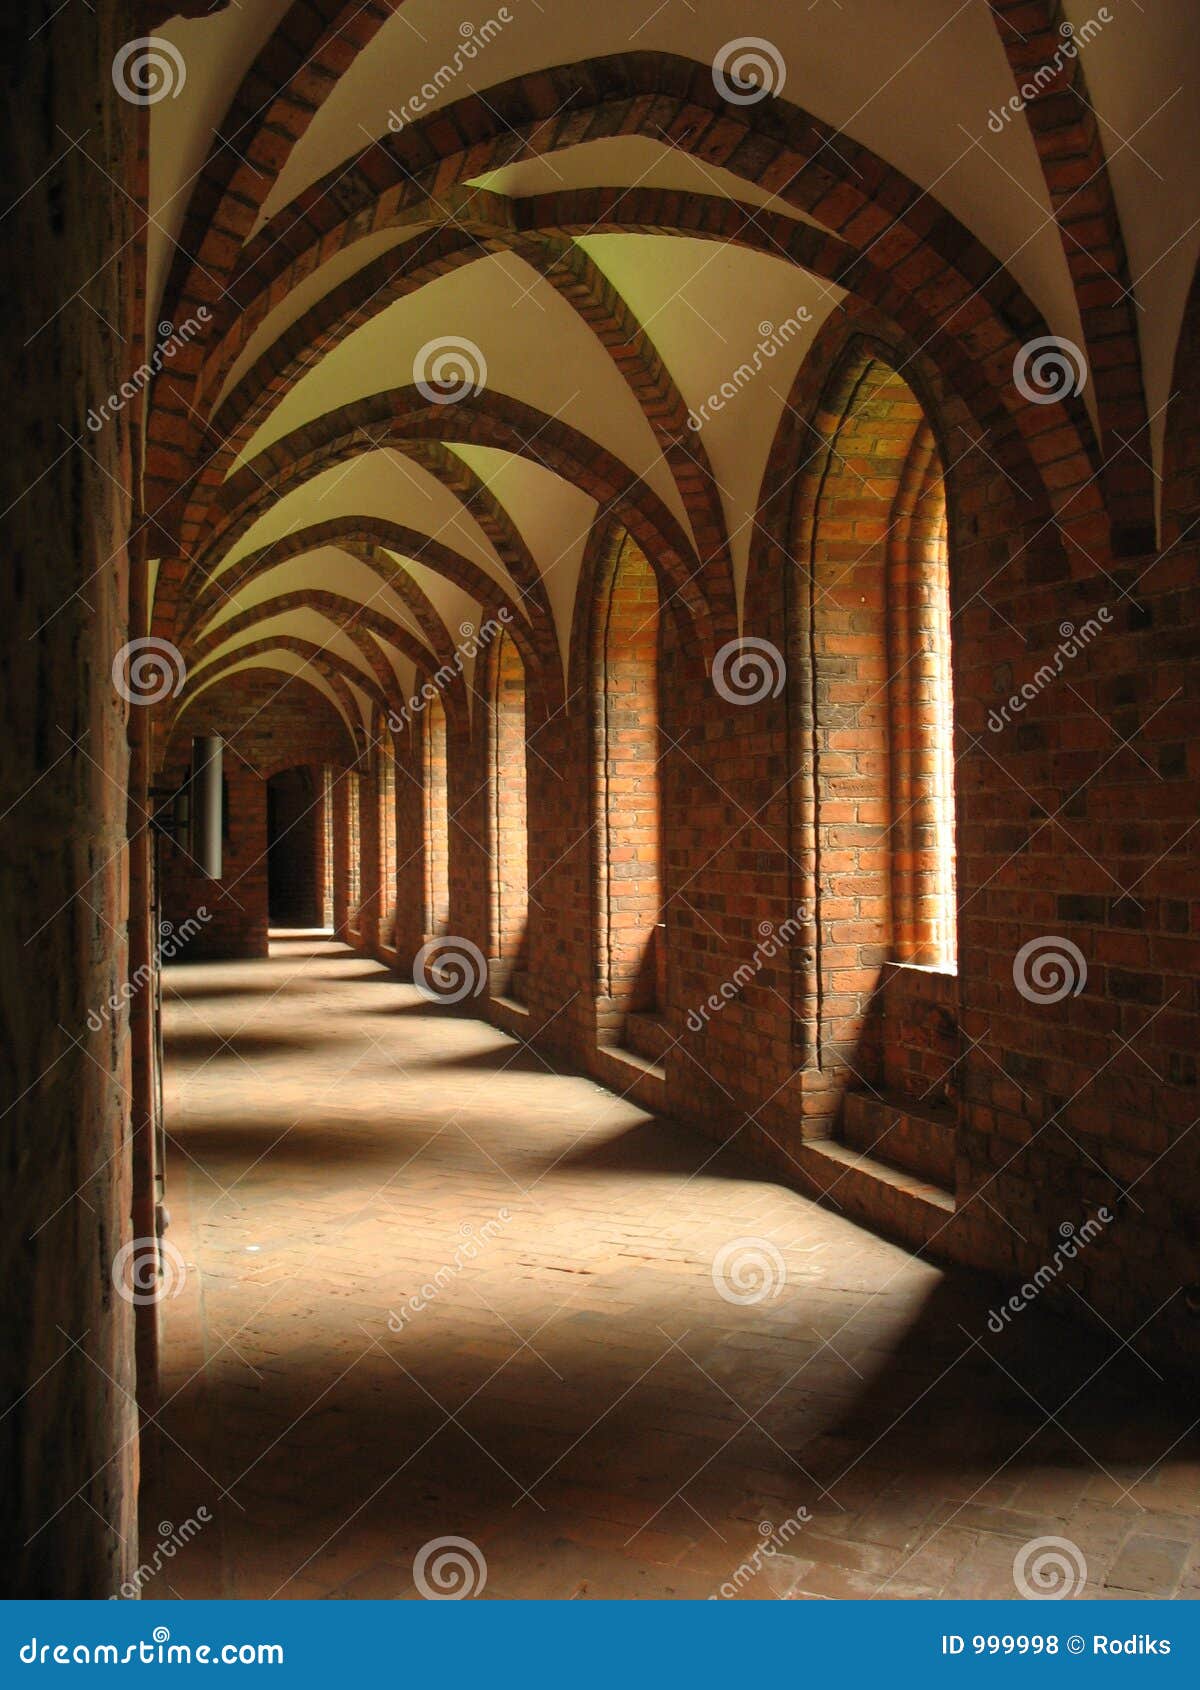 old arched cloister